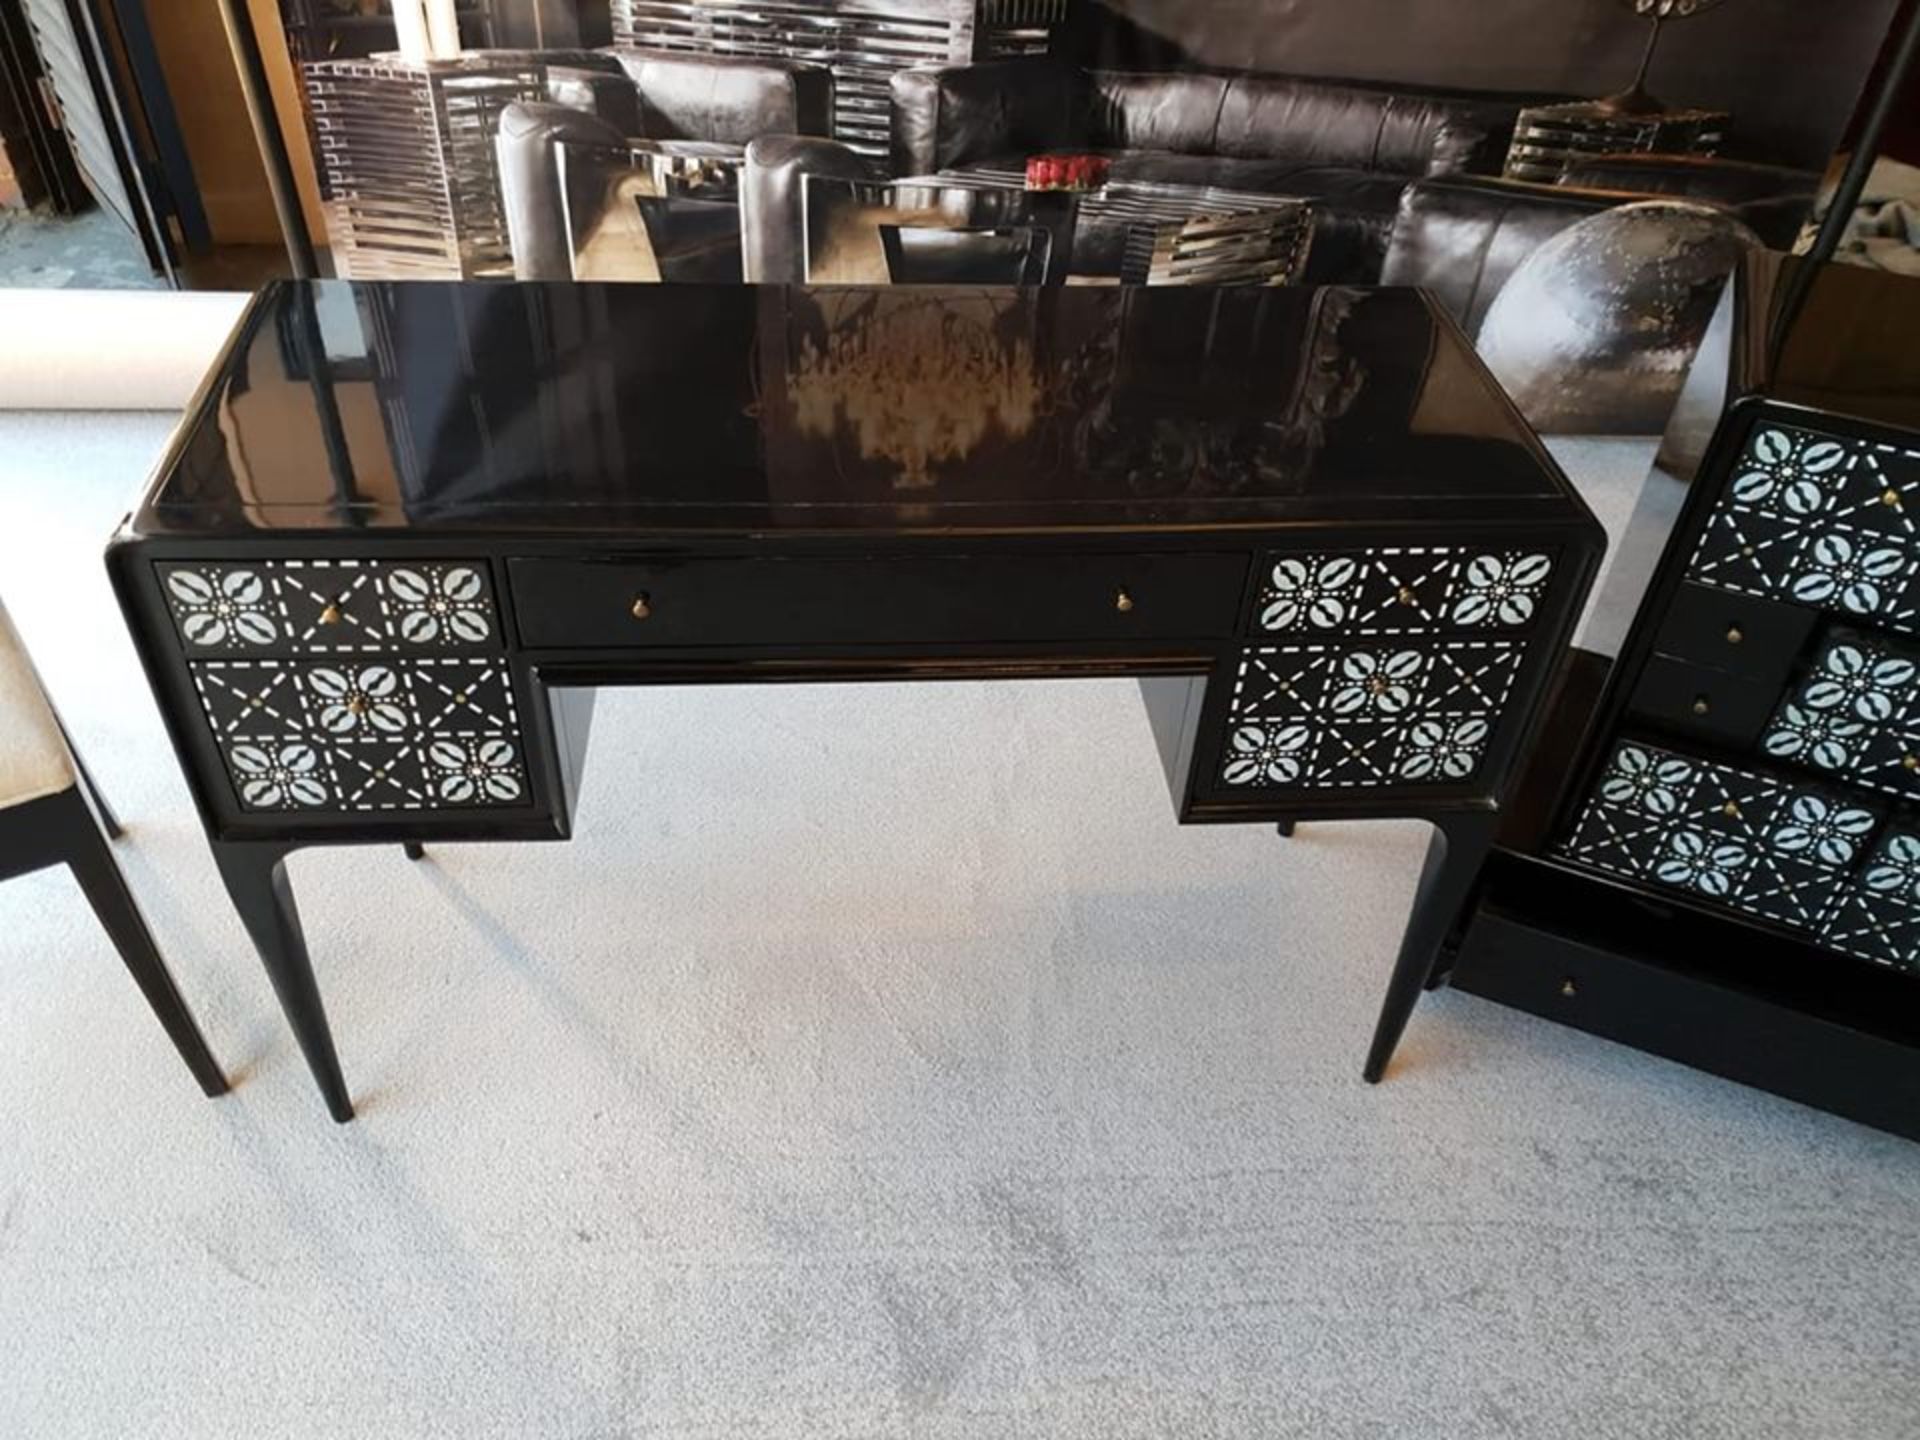 Shellshock Writing Desk By Boyd A Beautiful Black Lacquered Writing Desk With A Shell Geometric